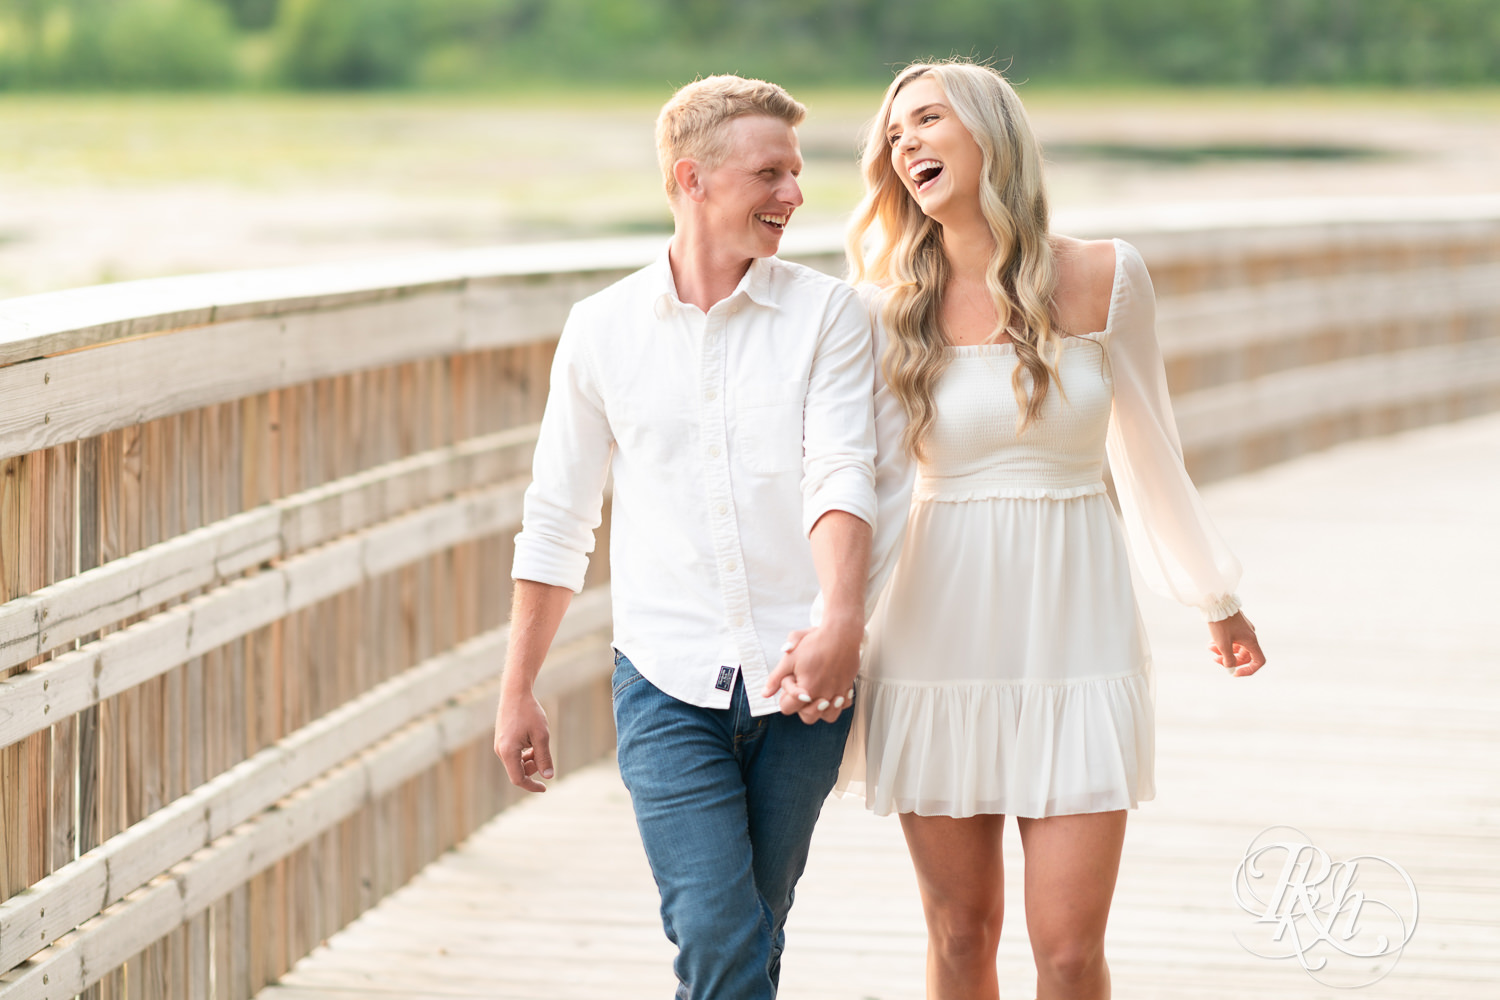 Man and woman in white and cowboy boots laugh walking on a bridge at Lebanon Hills Regional Park in Eagan, Minnesota.